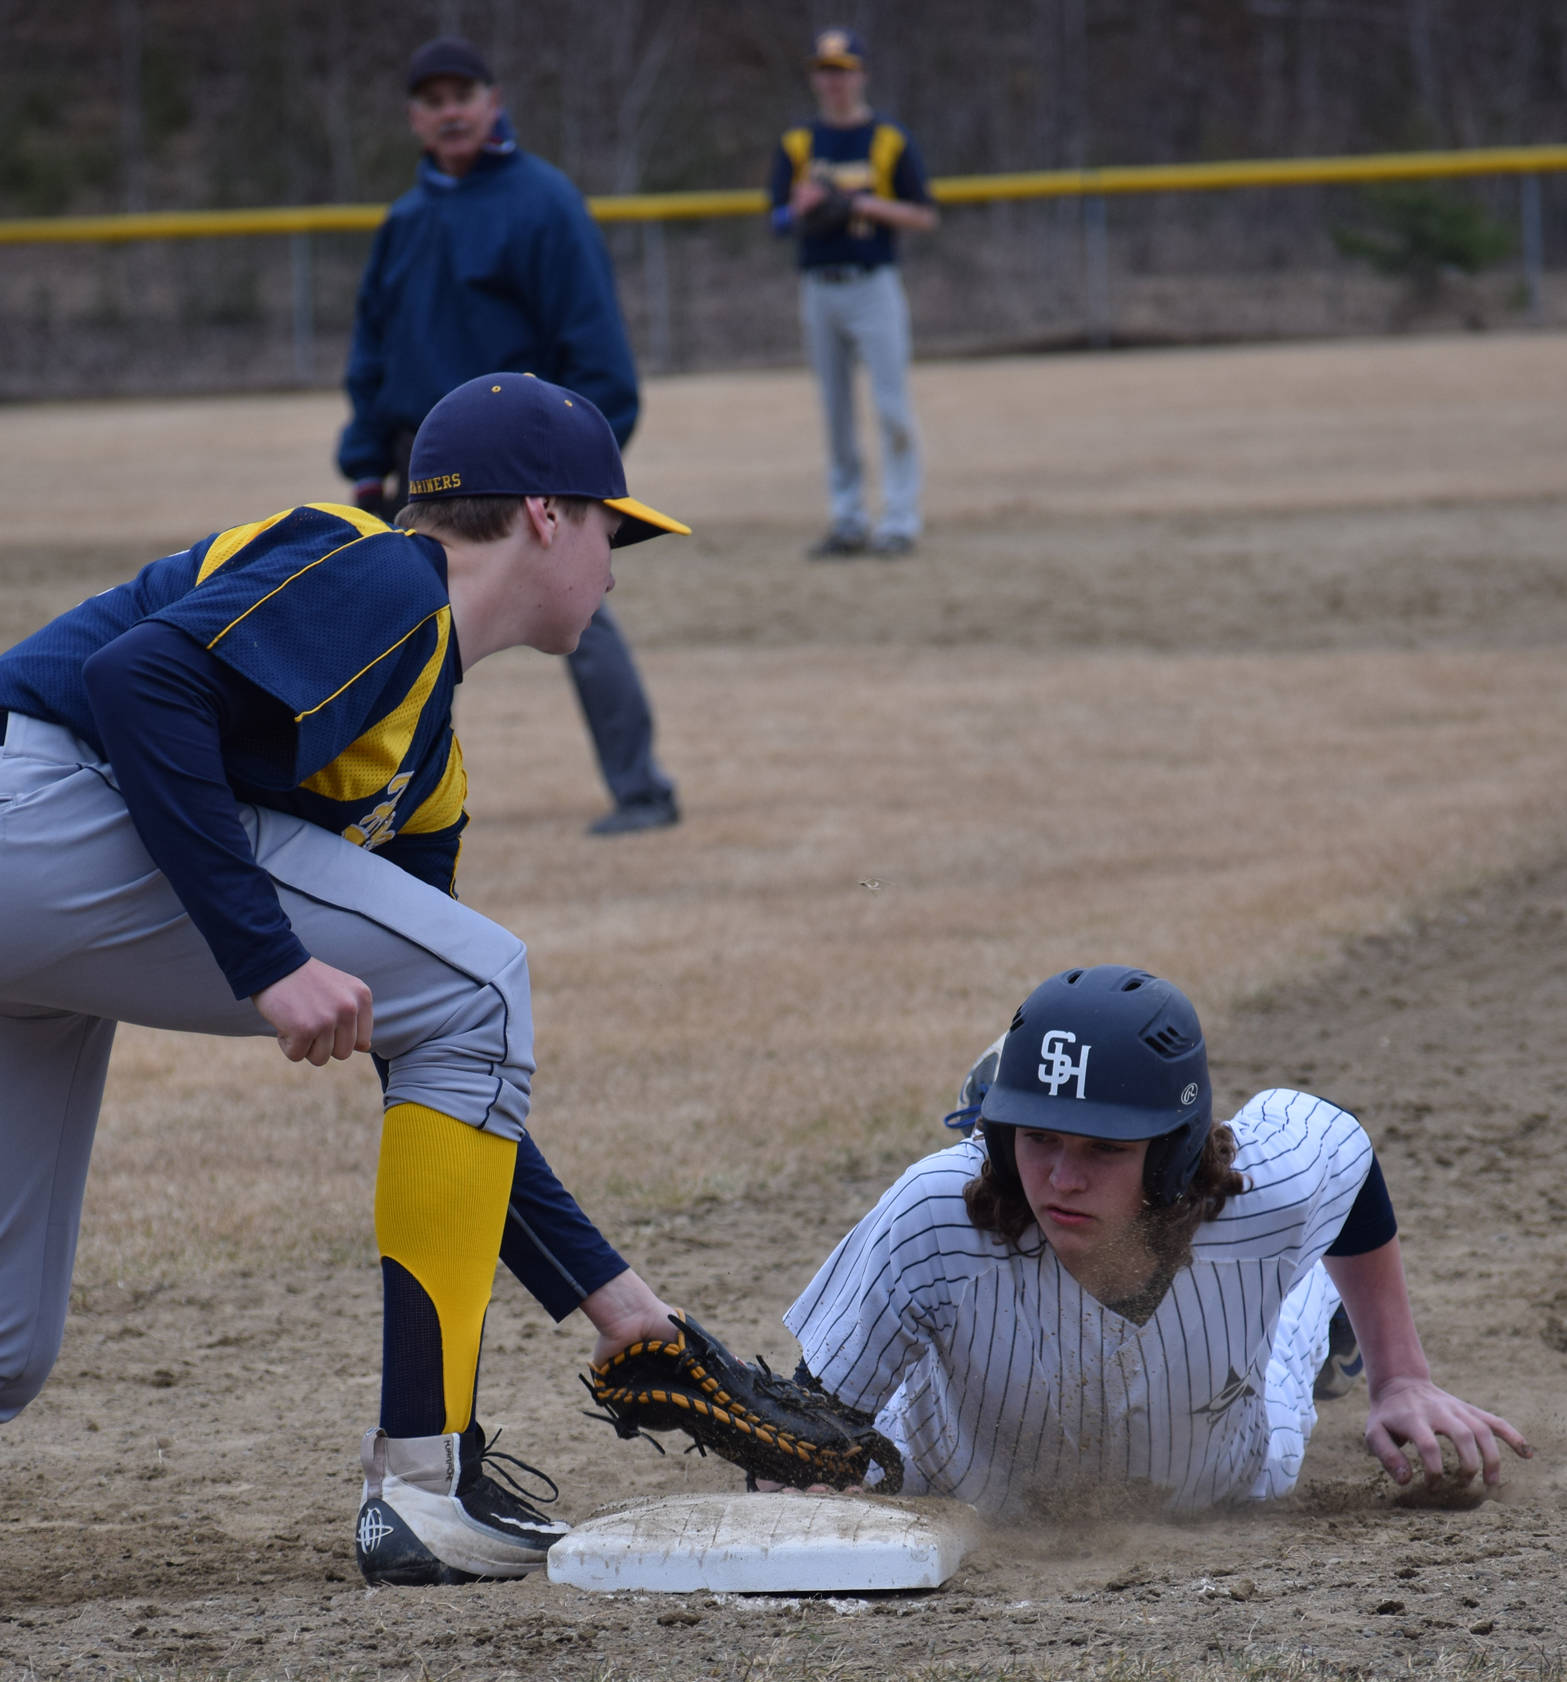 Soldotna’s Logan Smith slides under the tag of Homer’s Adam Brinster on Tuesday at the Soldotna Little League fields. (Photo by Jeff Helminiak/Peninsula Clarion)